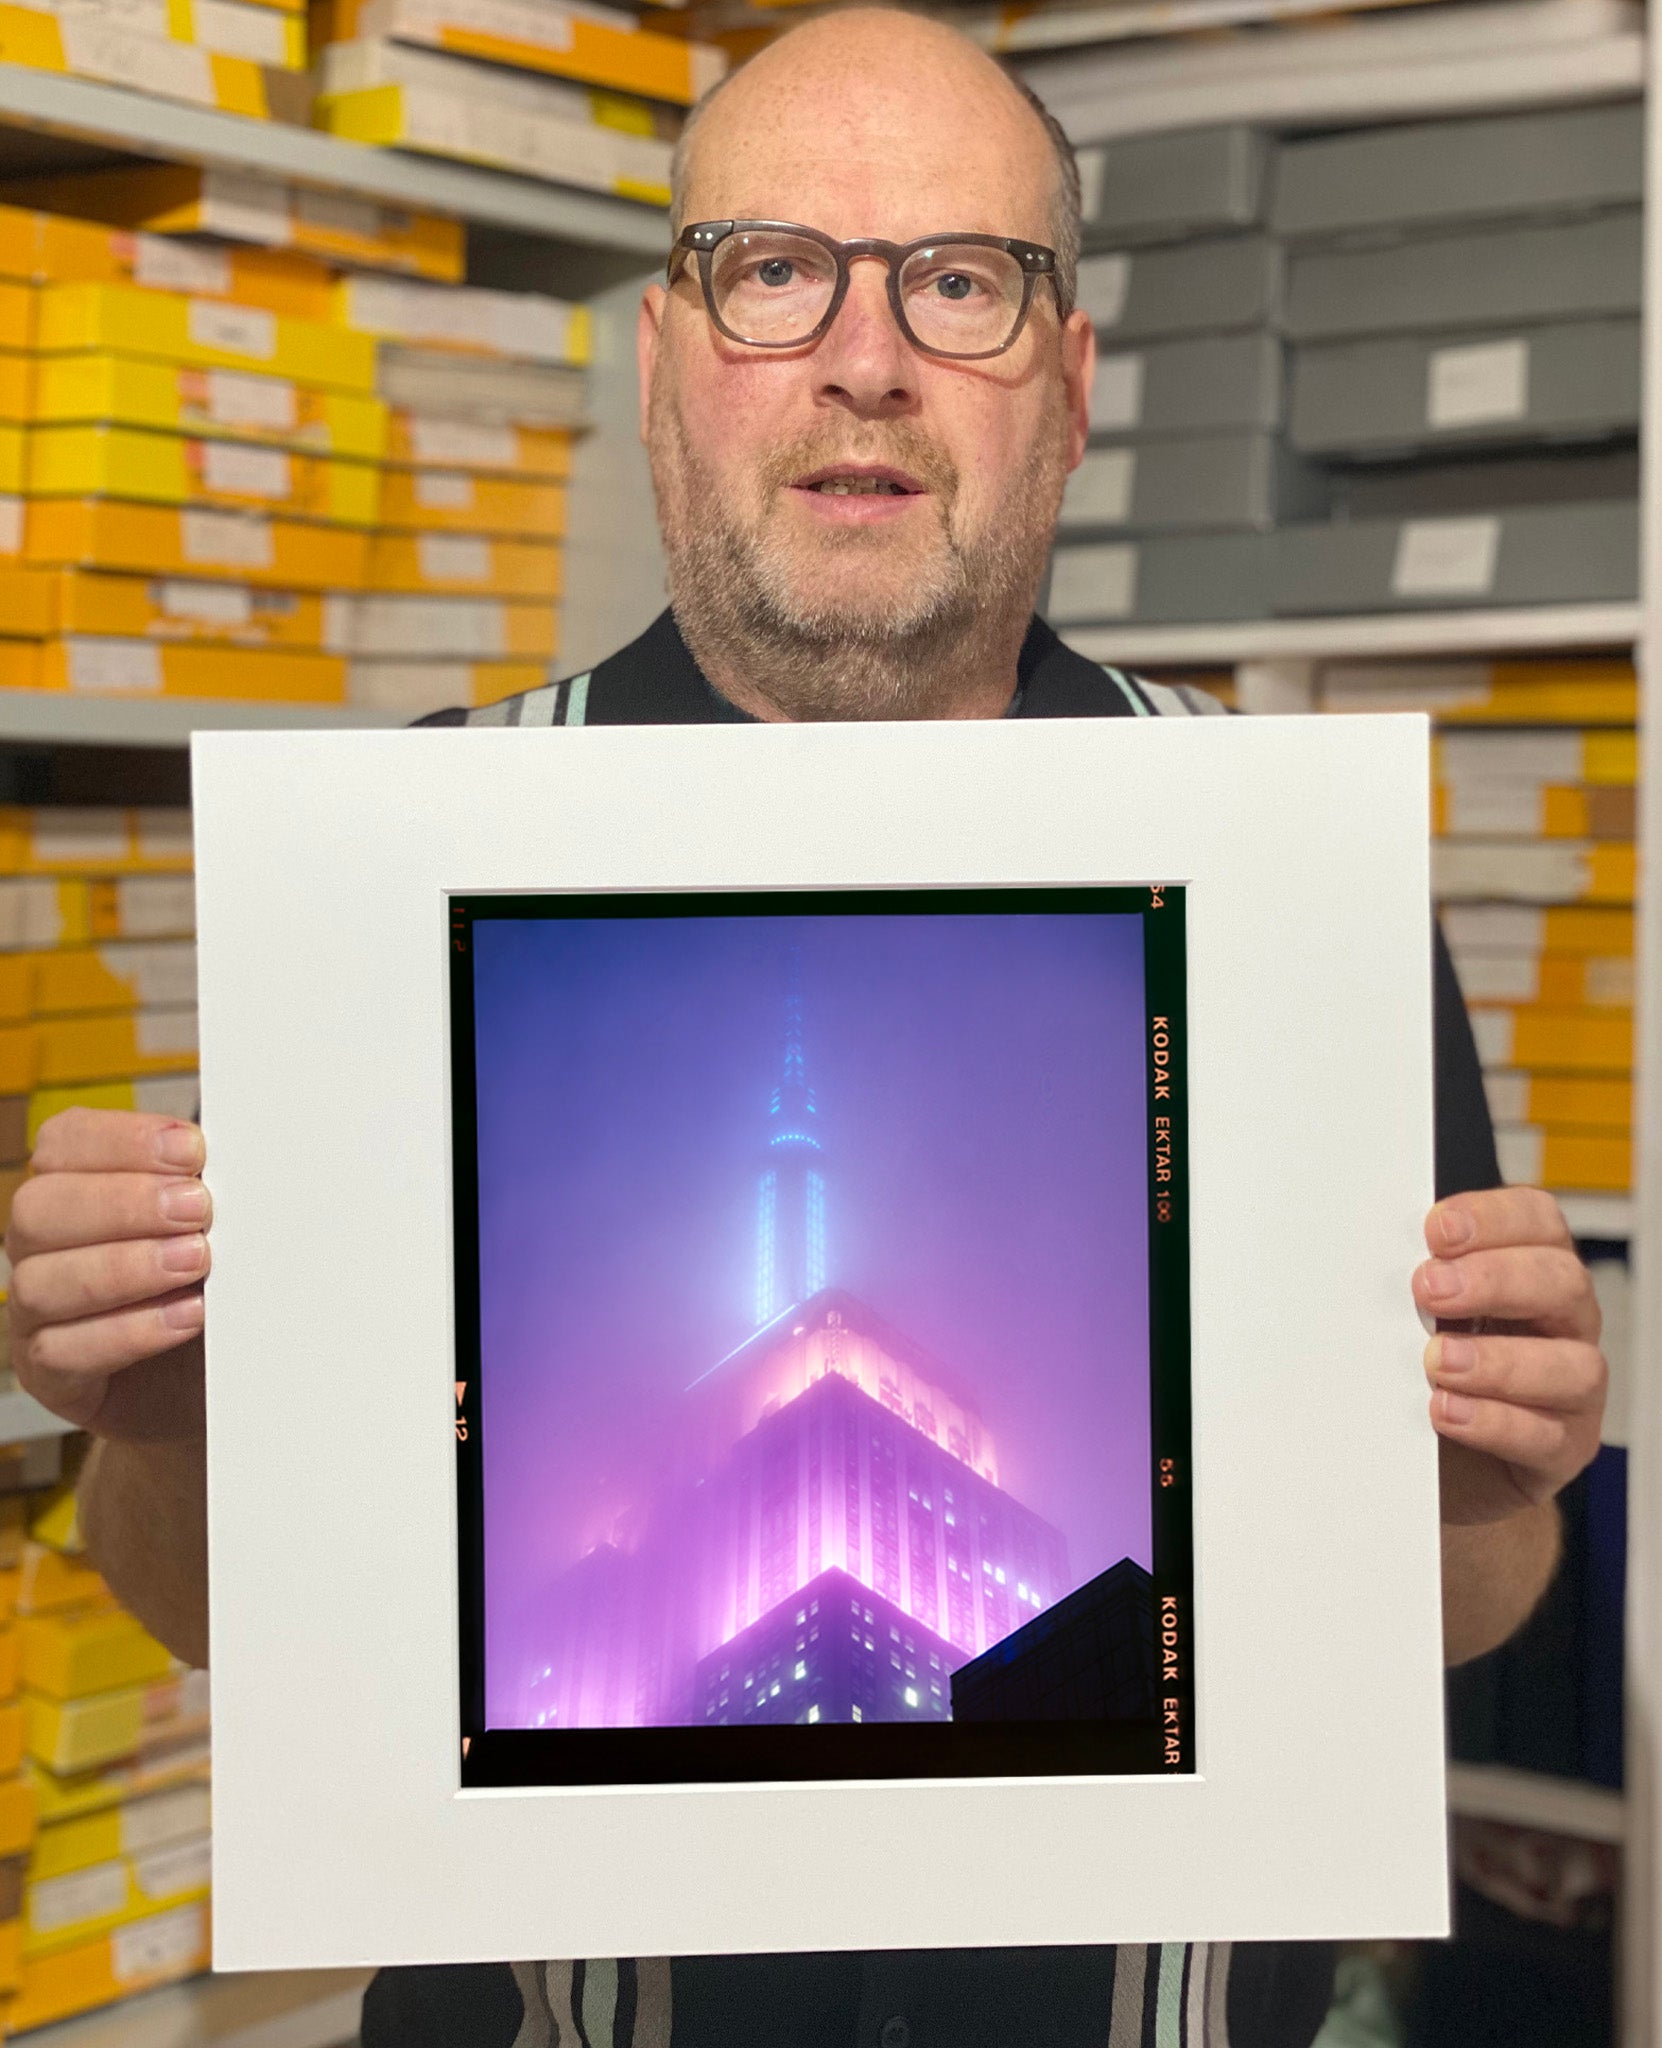 'NOMAD VIII (Film Rebate)', New York. Richard Heeps has photographed the iconic Empire State building in the mist. The NOMAD sequence of photographs capture the art deco architecture illuminated by changing colours, and is part of Richard's street photography portfolio which depict the colour, fabric and structure of cities with distinct style. This 6x7 format edition is bordered by the Kodak film rebate. 